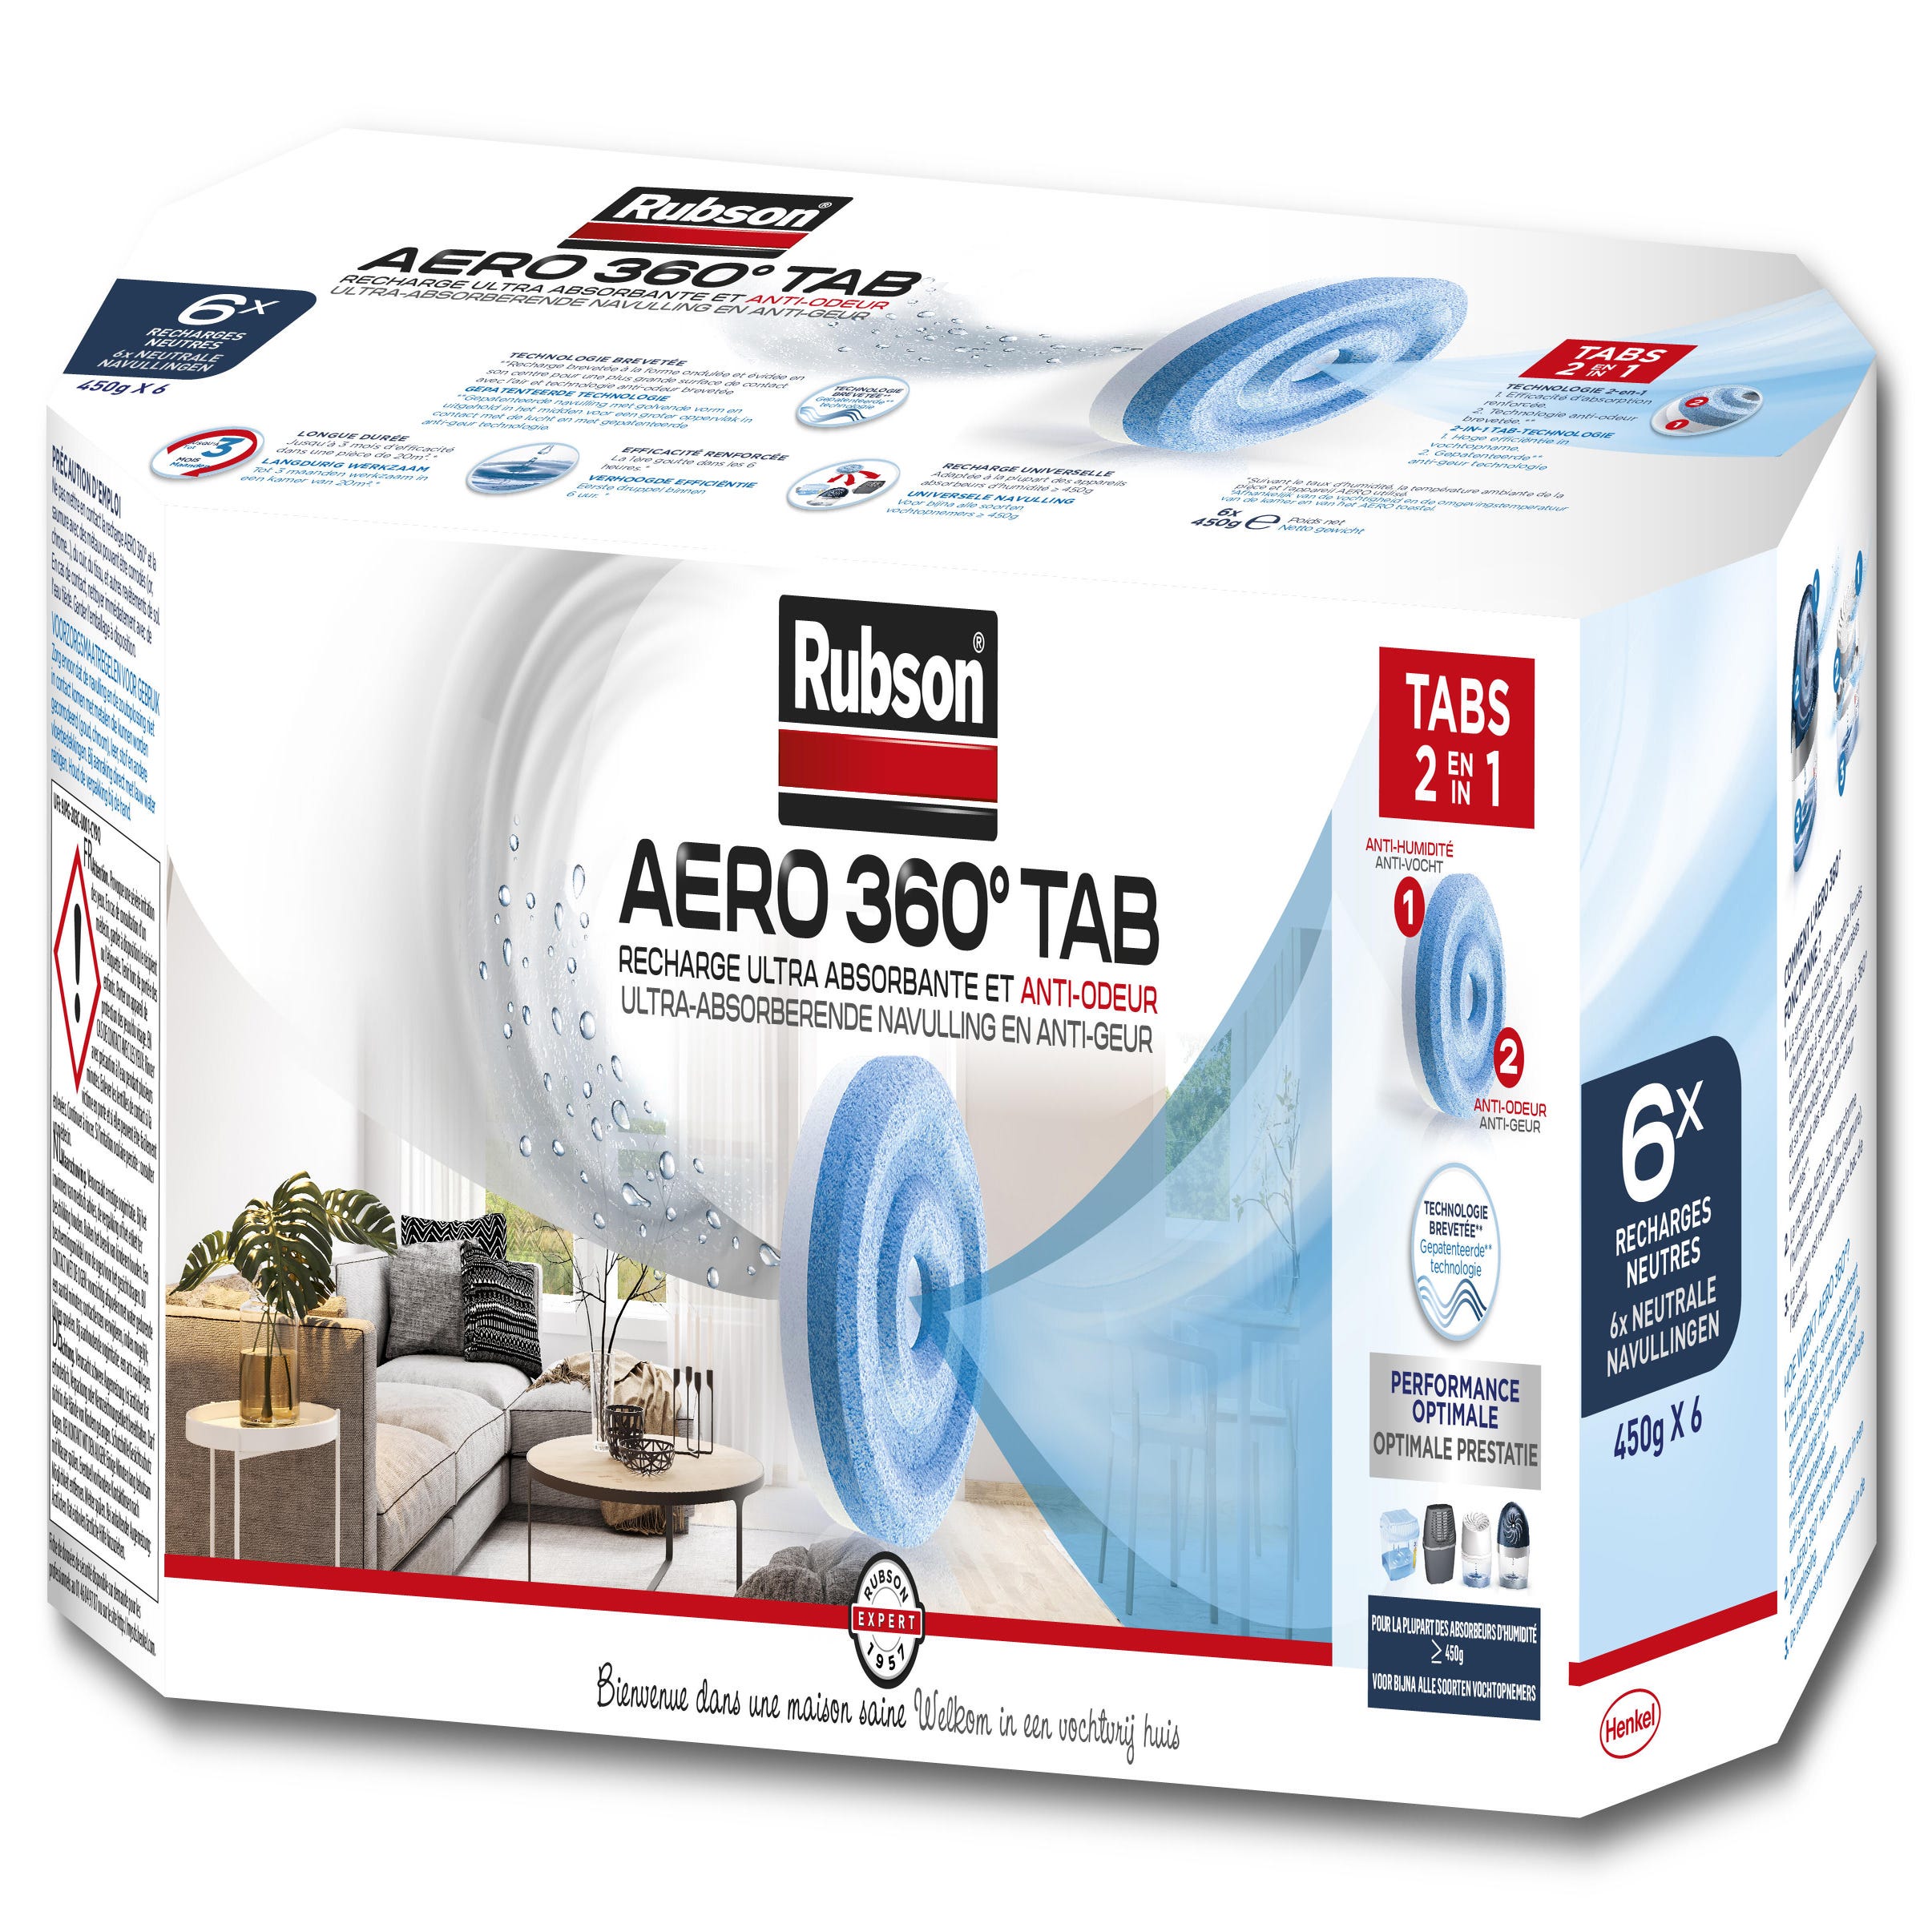 Rubson 2 recharges pour absorbeur d'humidité, Aero 360° Tab 